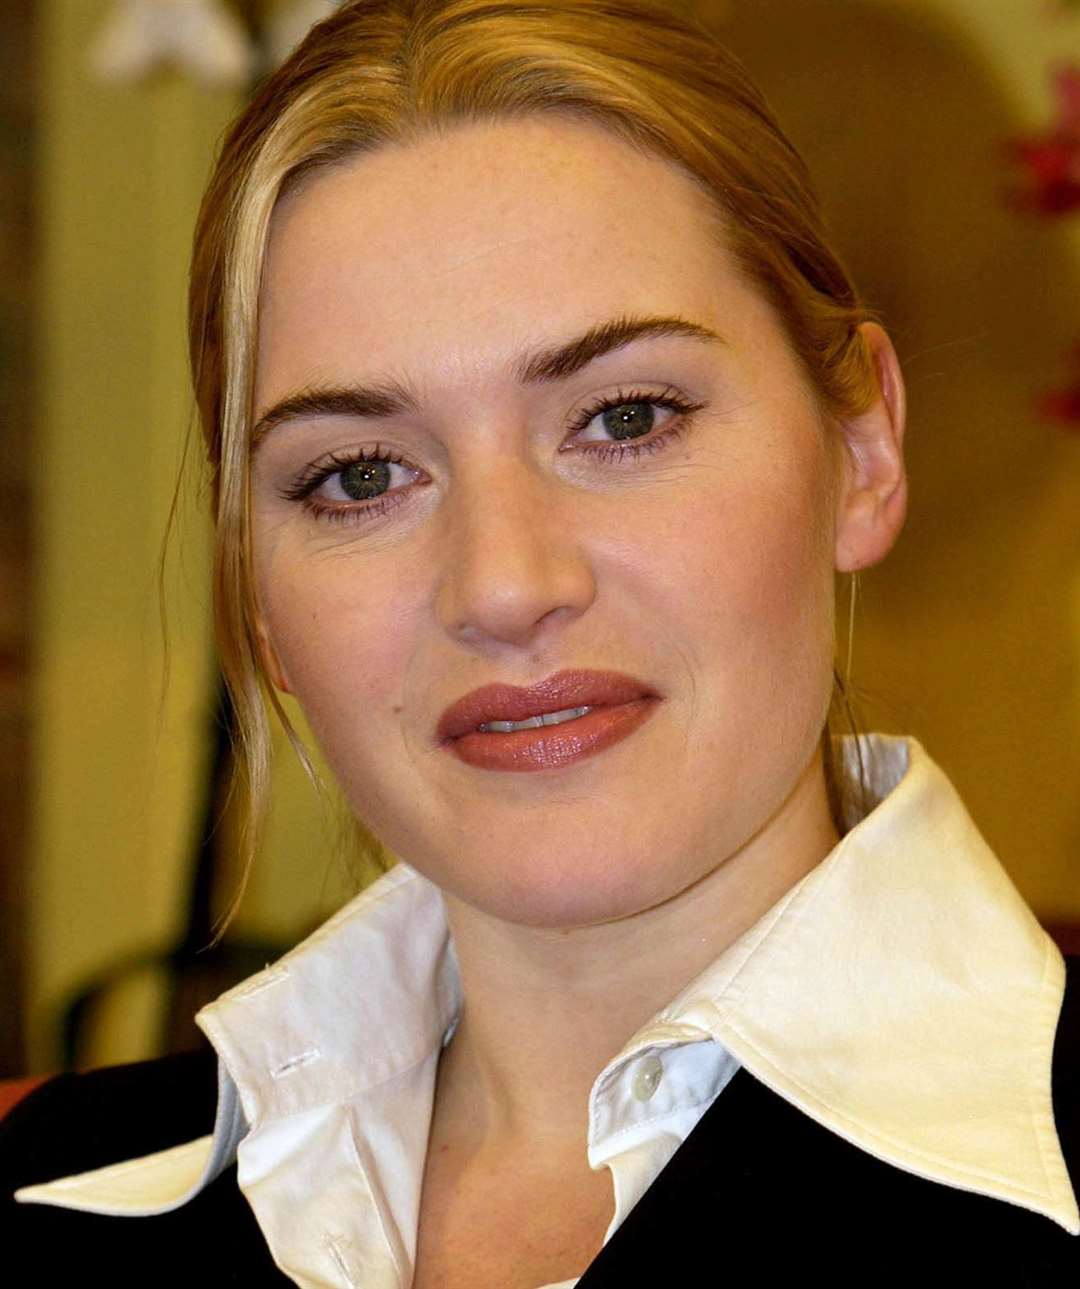 Kate Winslet is said to be filming this evening.